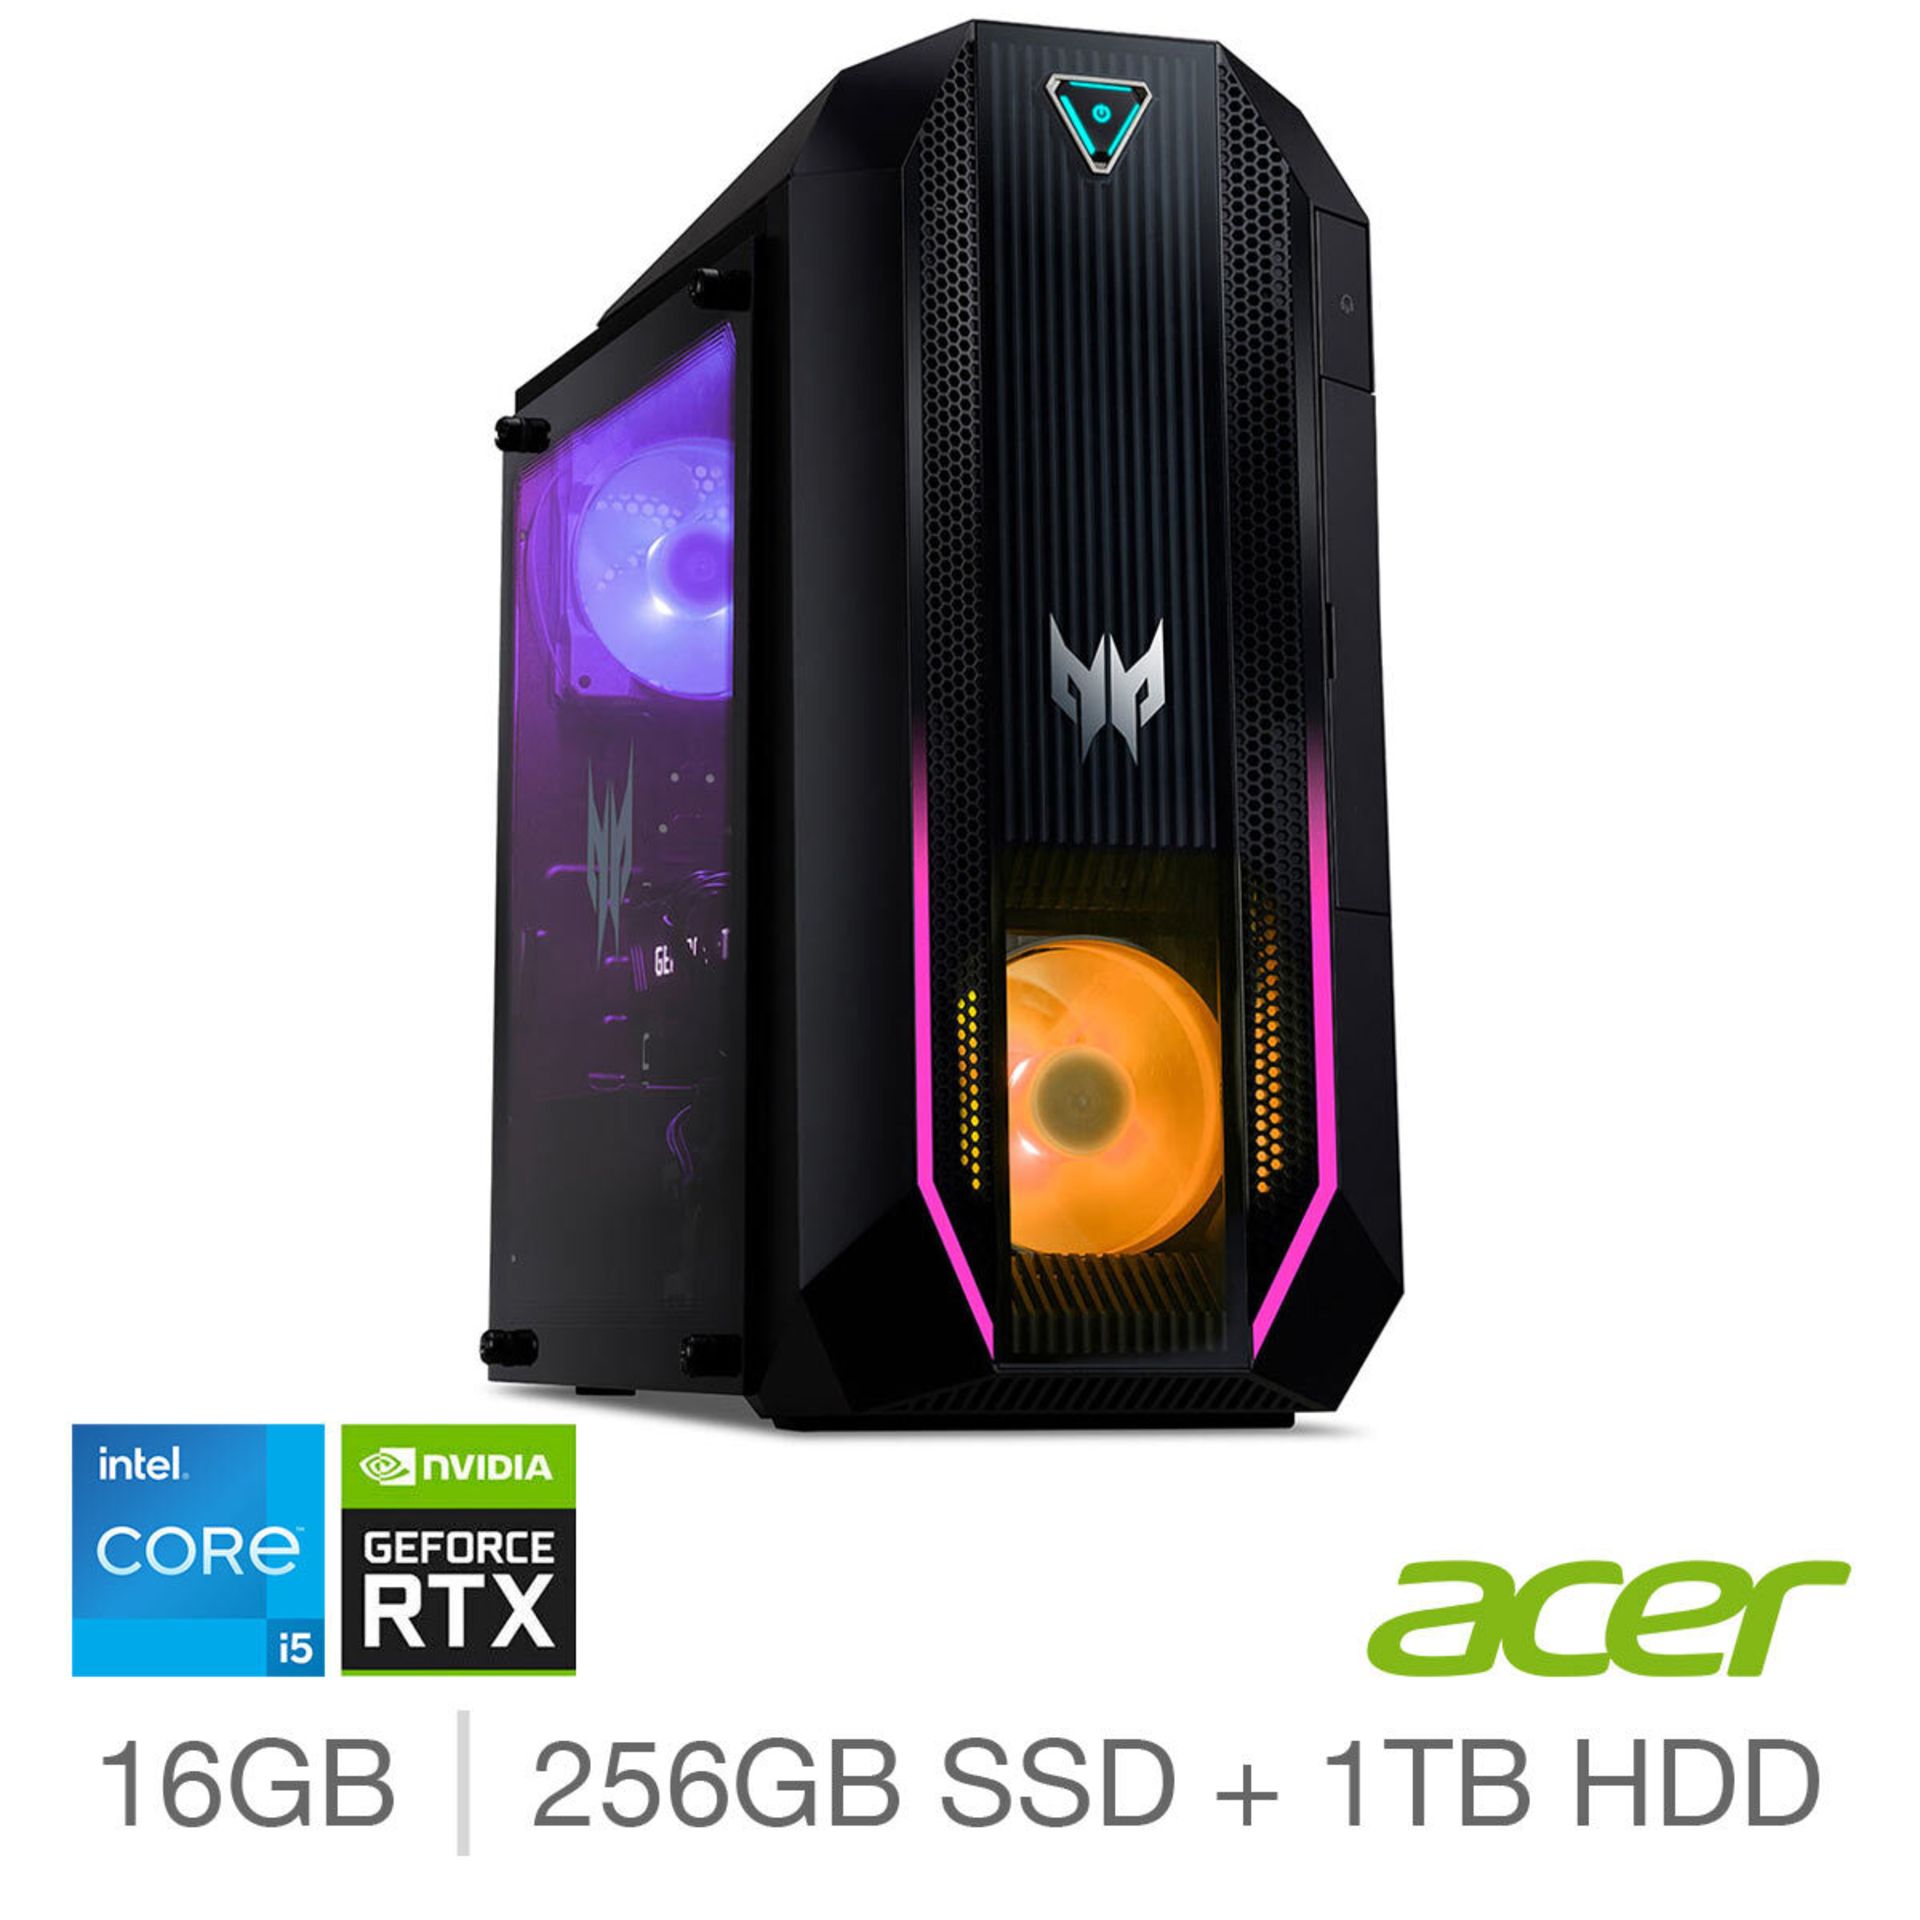 1 BOXED ACER PREDITOR ORION 3000, INTEL CORE I5, 16GB RAM, 256GB SSD + 1TB HDD, NVIDIA GEFORCE RTX